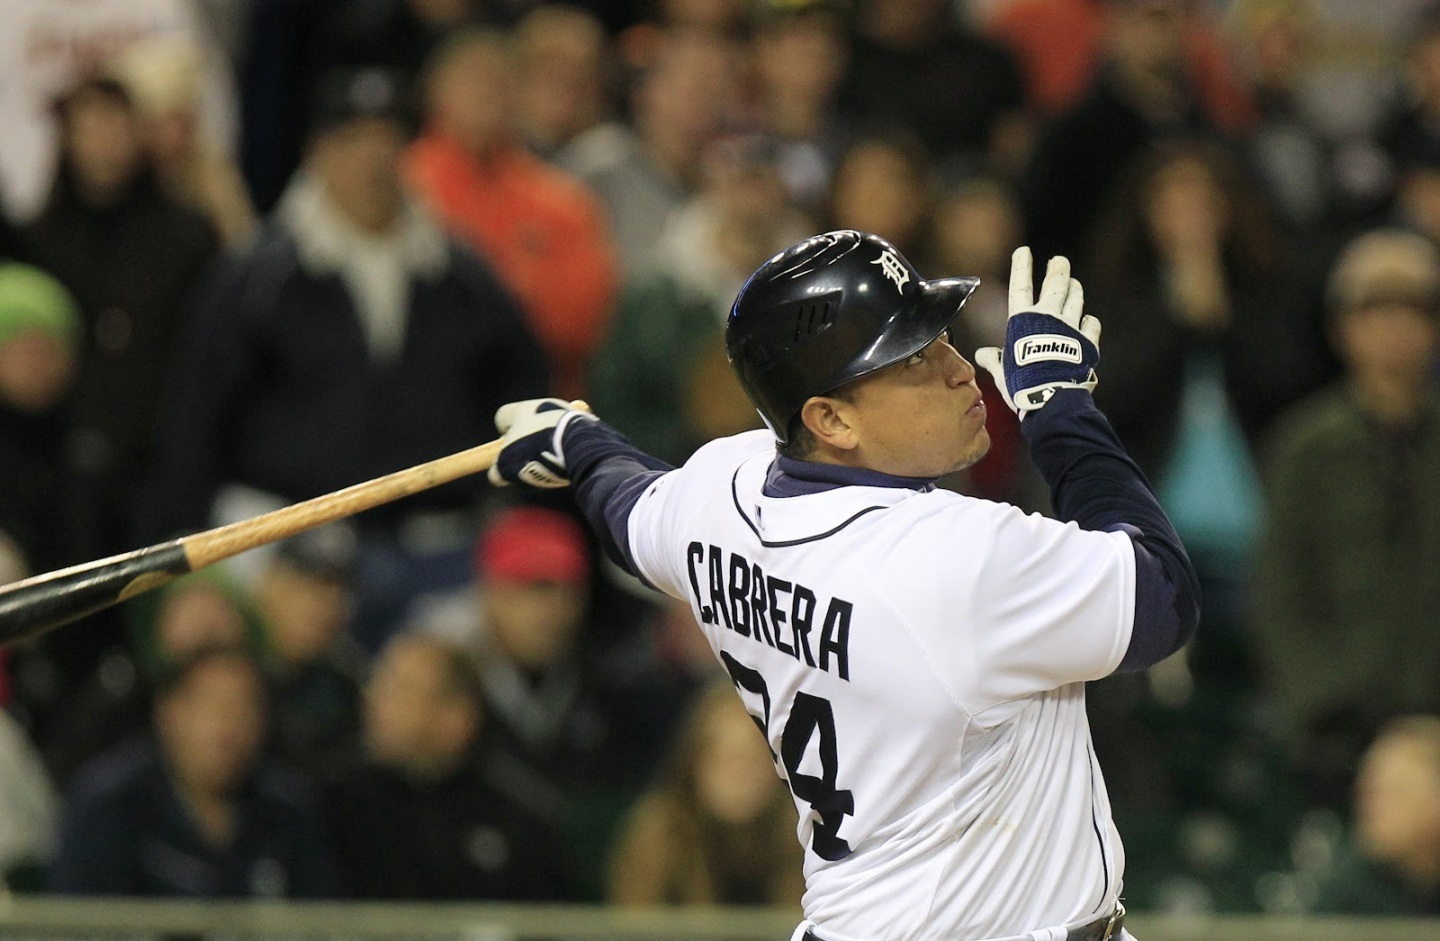 Free download Oag Miguel Cabrera Wallpaper Photo Shared By Jamill